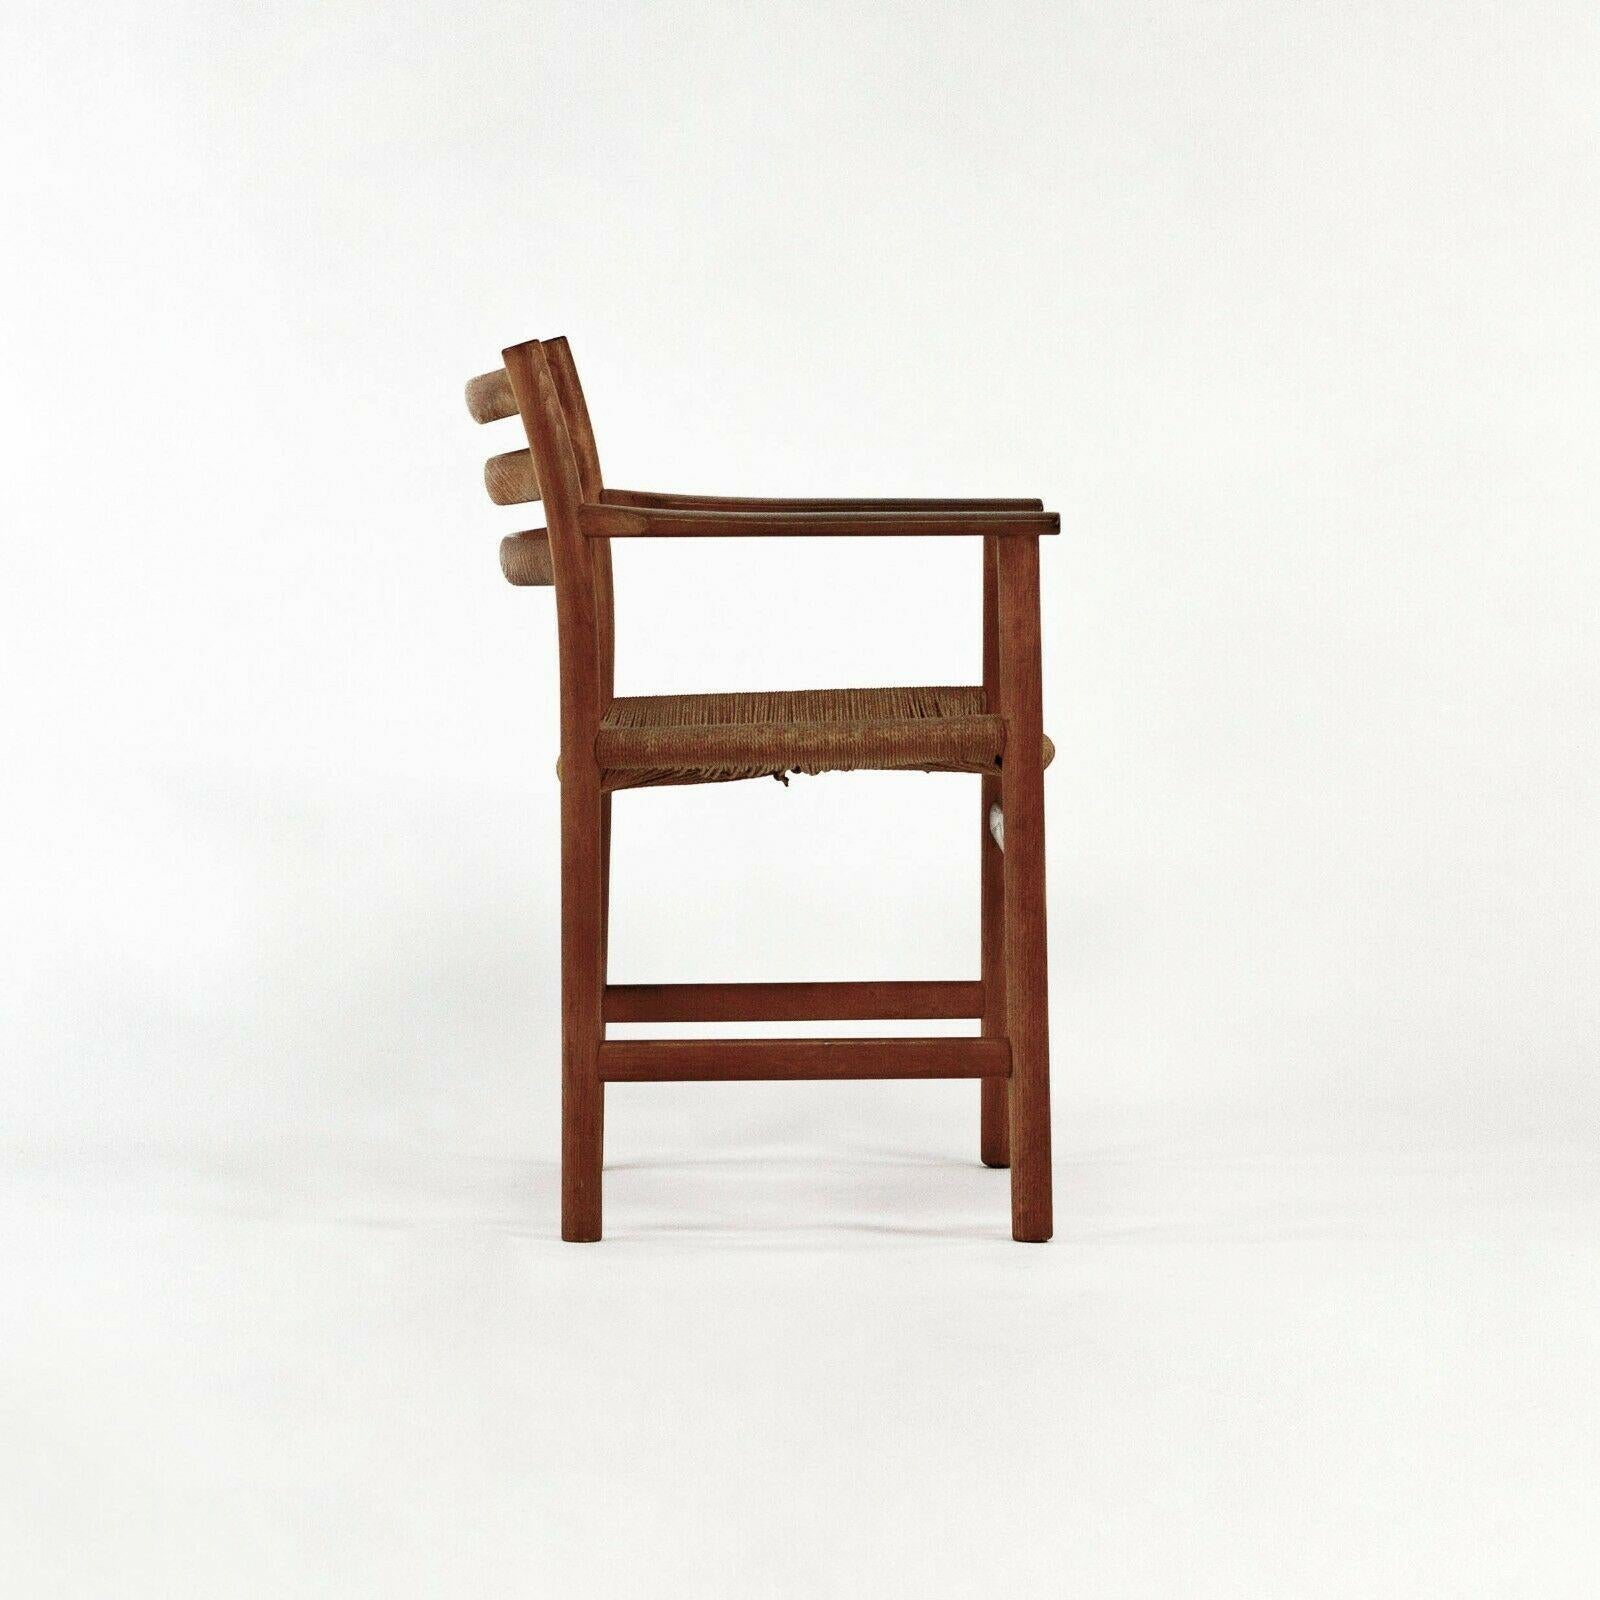 Modern 1960s Model 351 Dining Arm Chair by Poul Volther for Soro Stolefabrik of Denmark For Sale